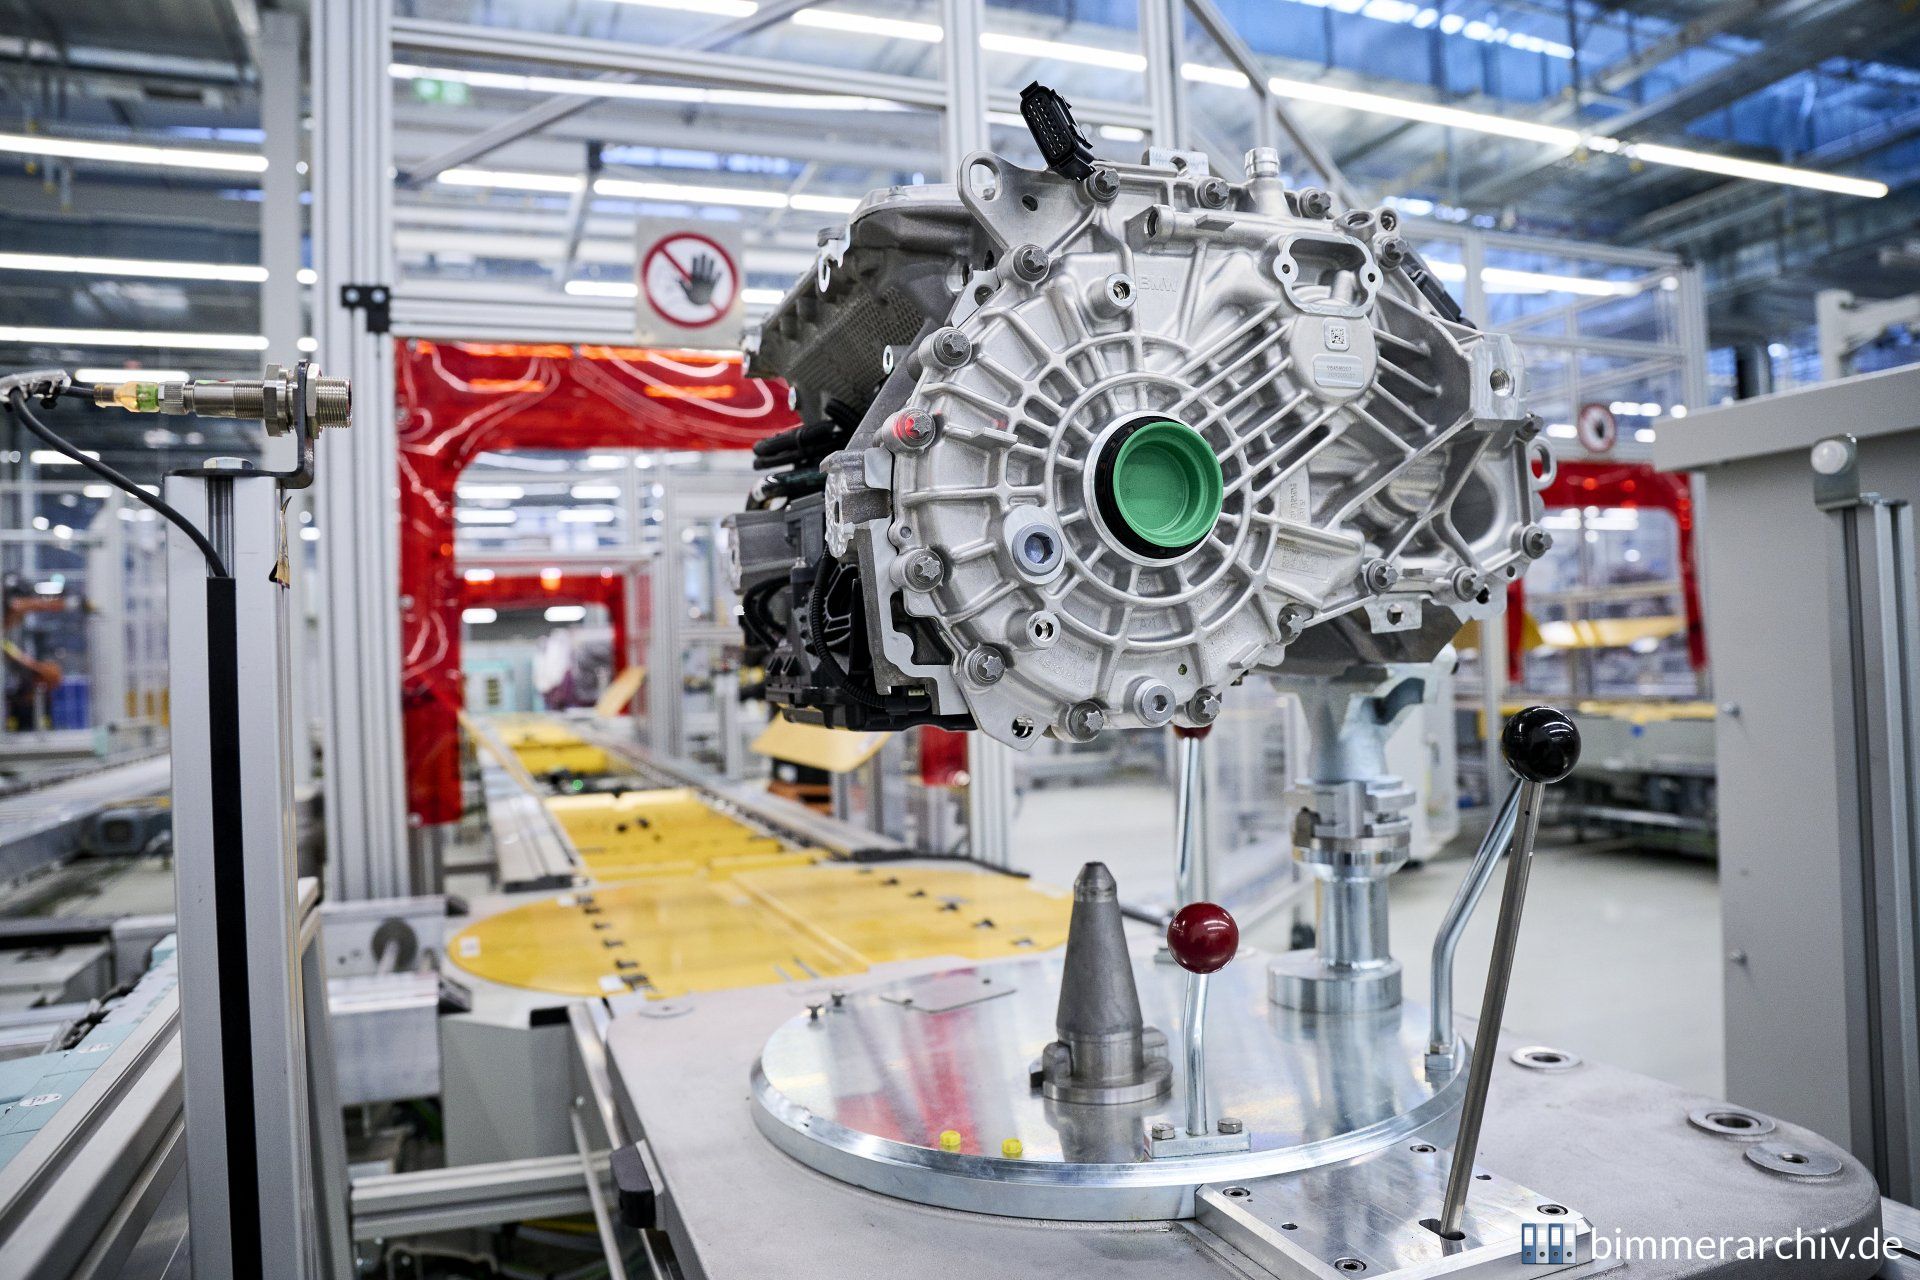 Production of the highly-integrated e-drive